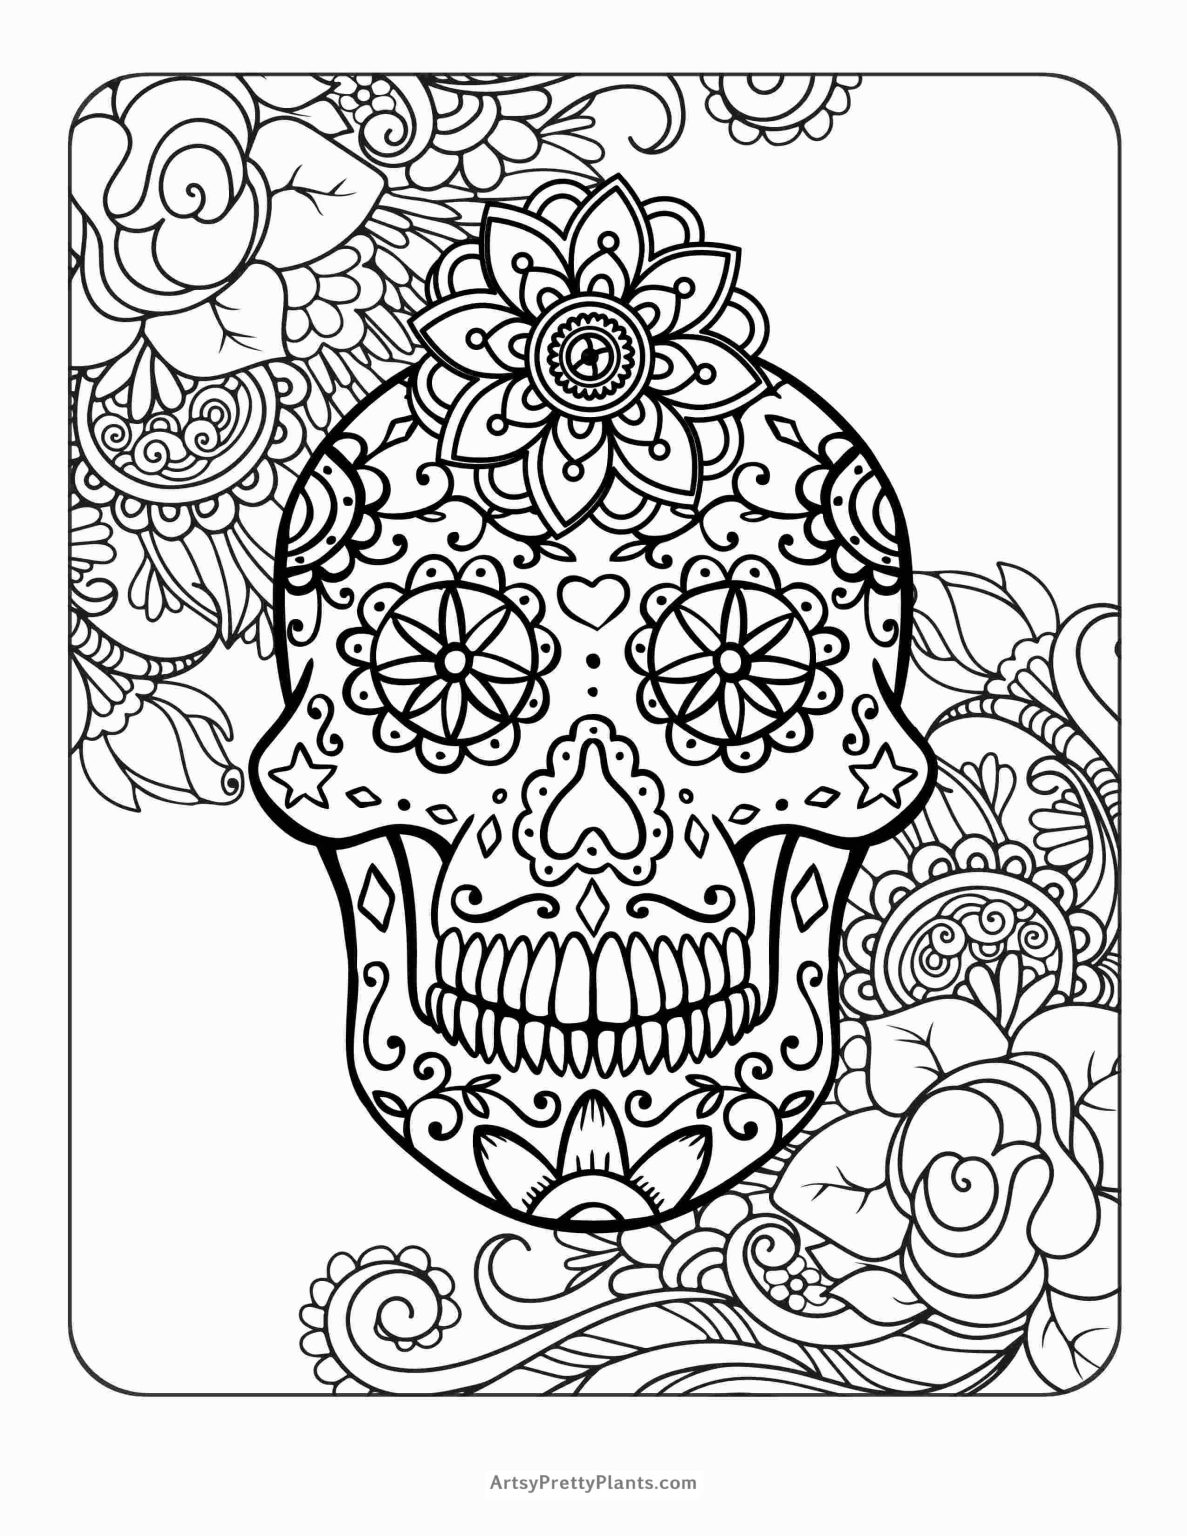 Sugar Skull Coloring Pages 04 1187x1536 